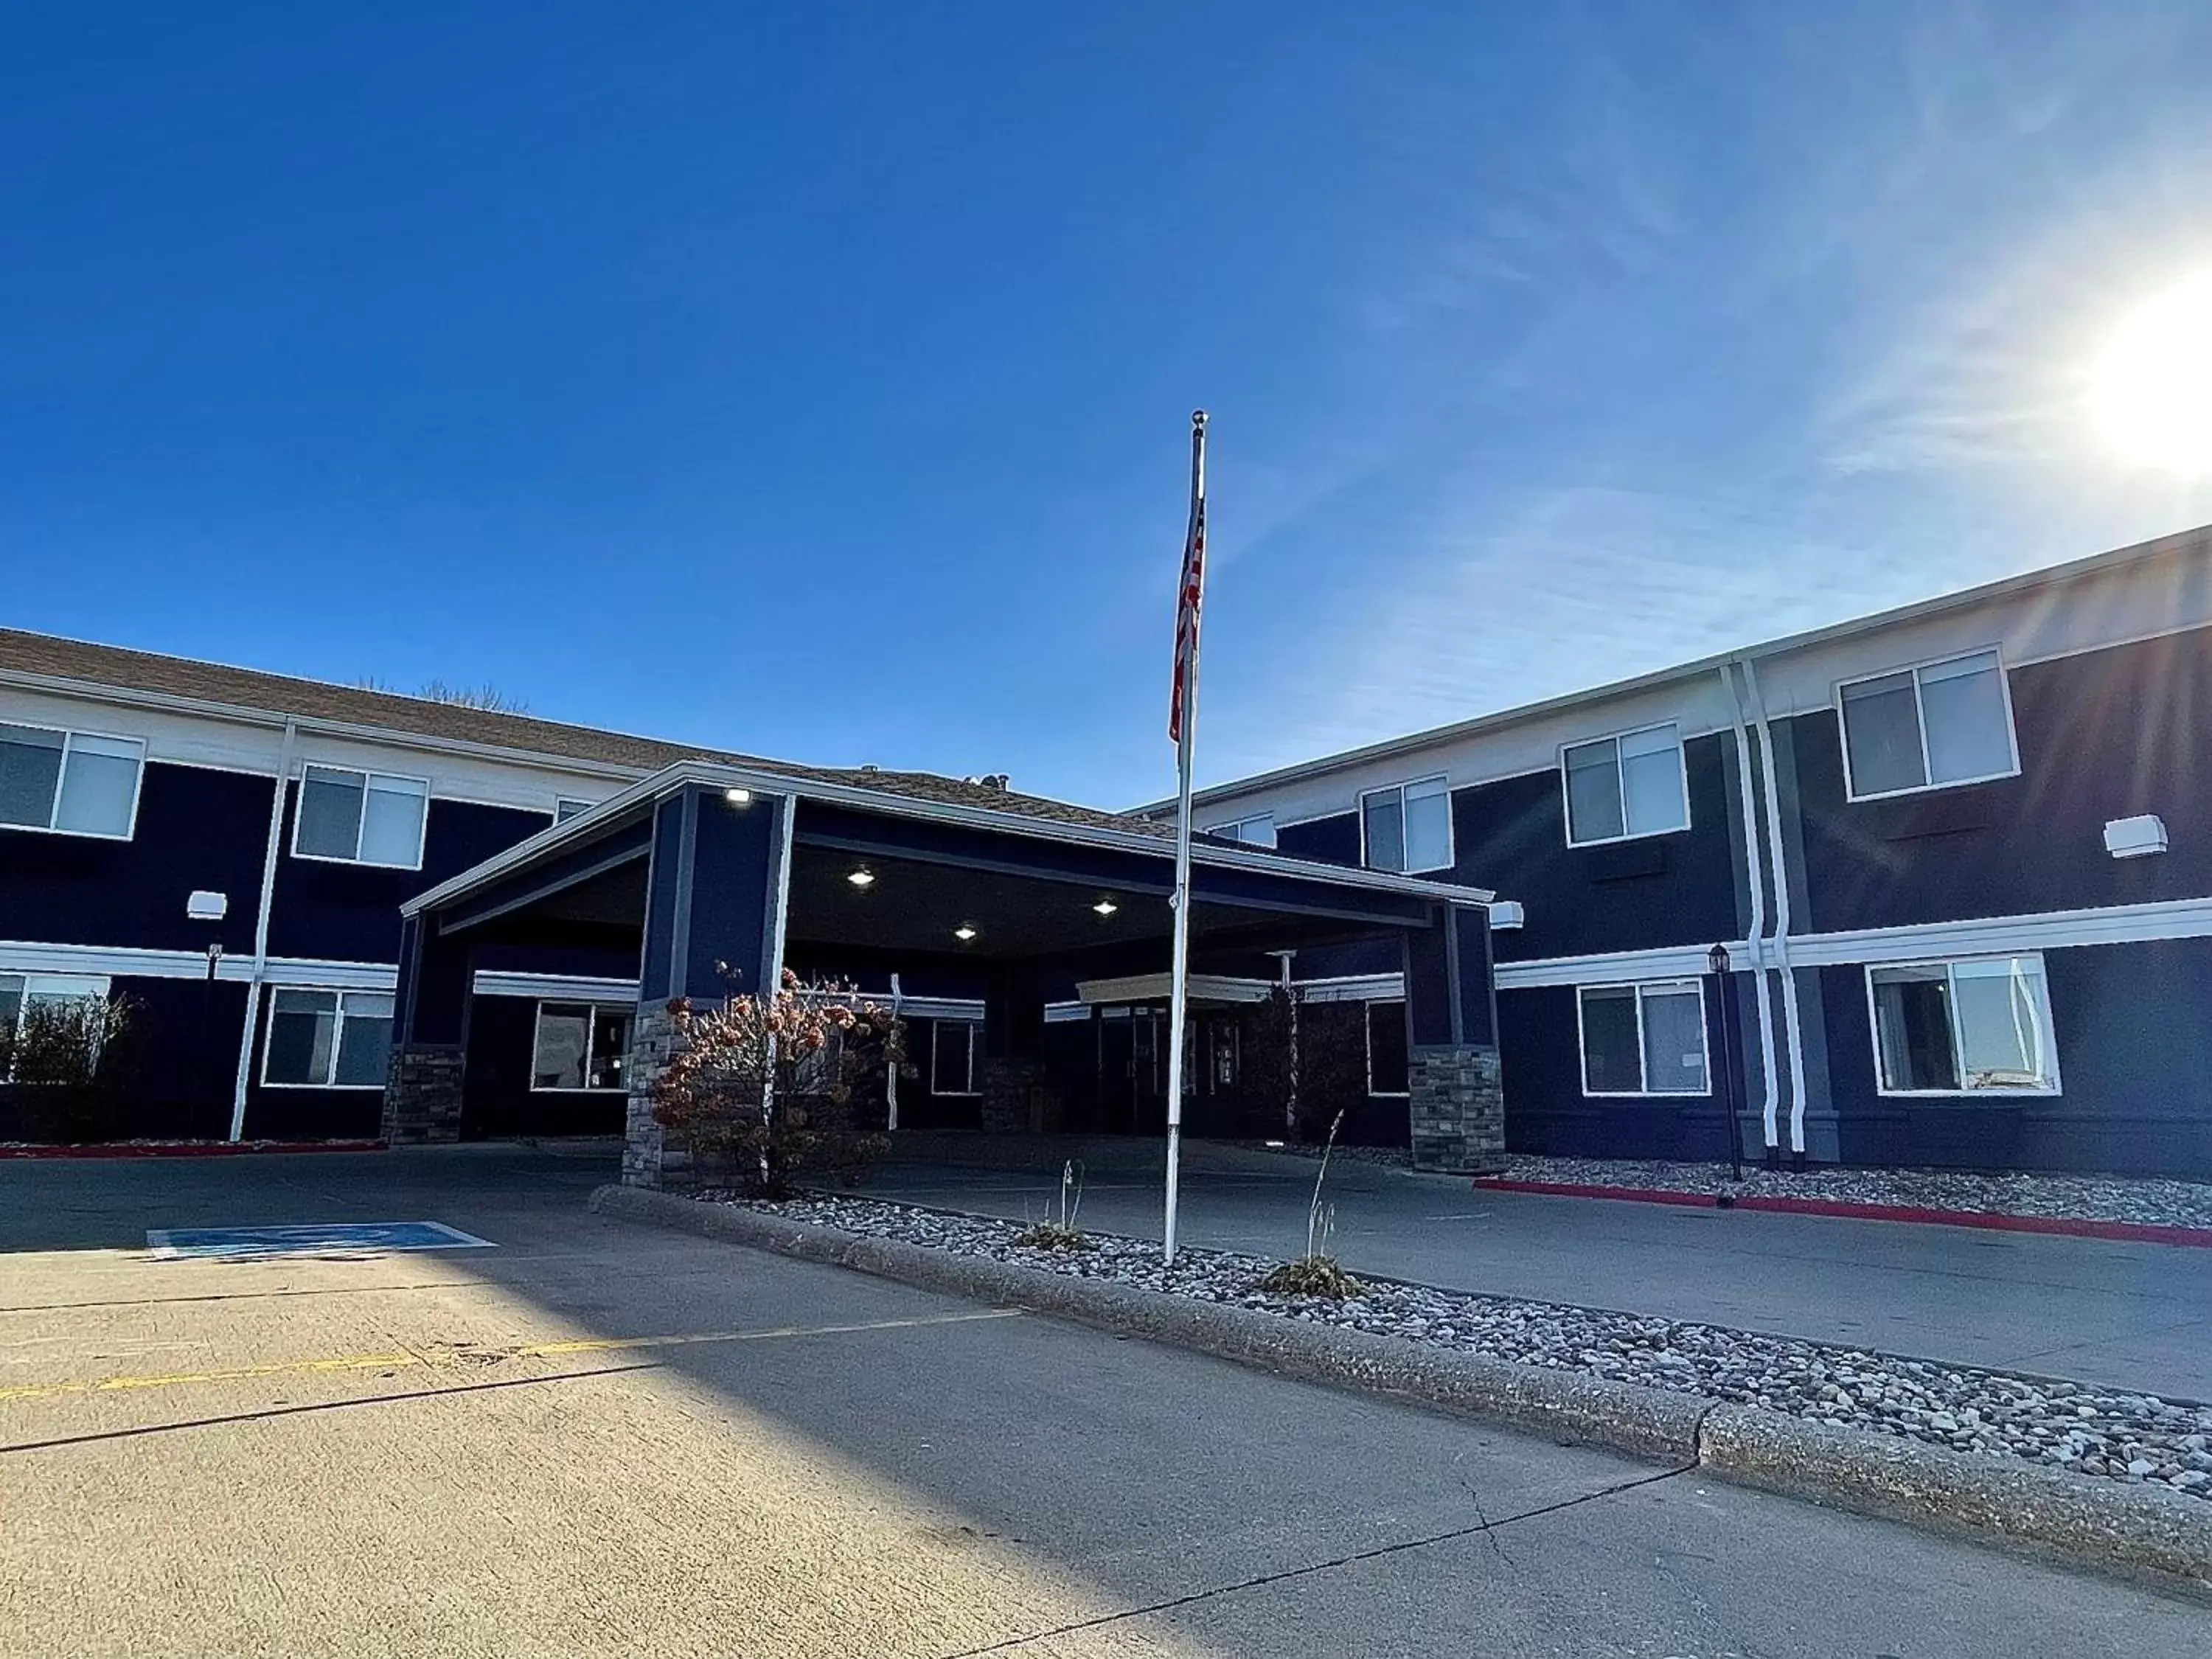 Property Building in Comfort Inn Sioux City South